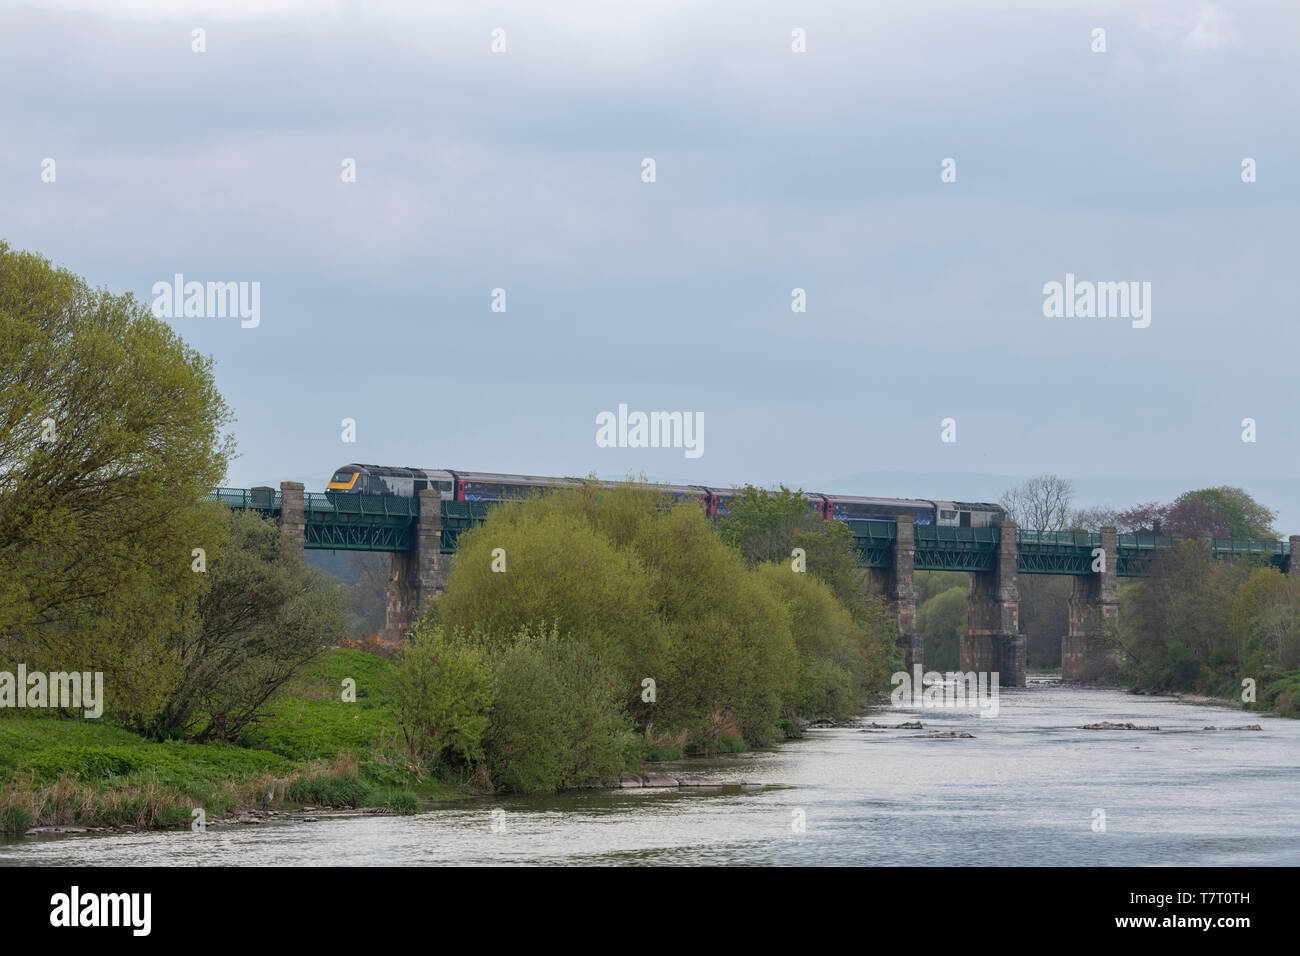 A Scotrail 'Inter7City' HST (High Speed Train) on the Railway Bridge Crossing the River North Esk at Marykirk Stock Photo